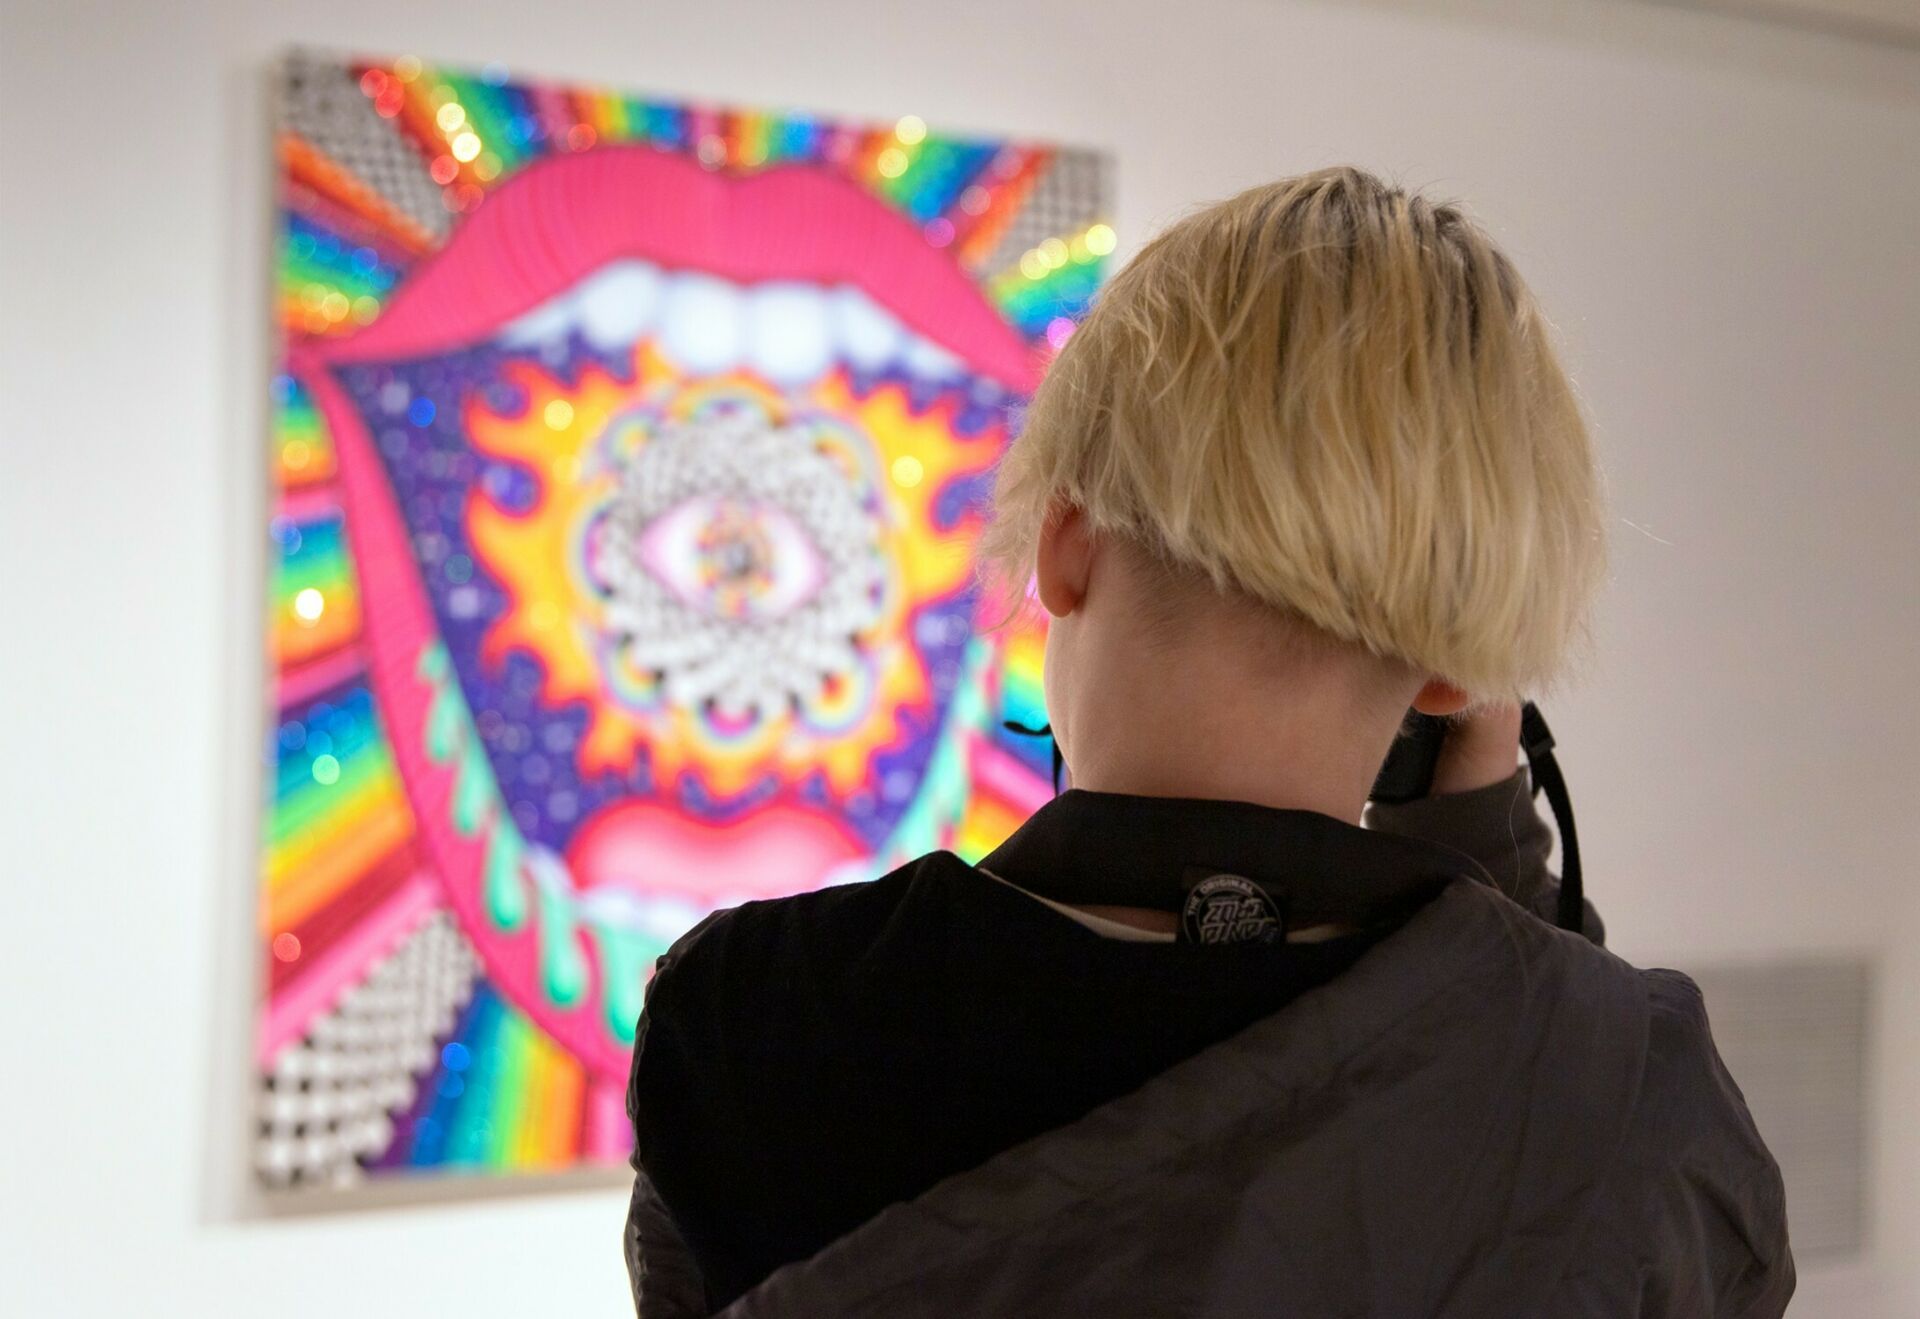 A student photographing colorful artwork on display in Zoller Gallery.